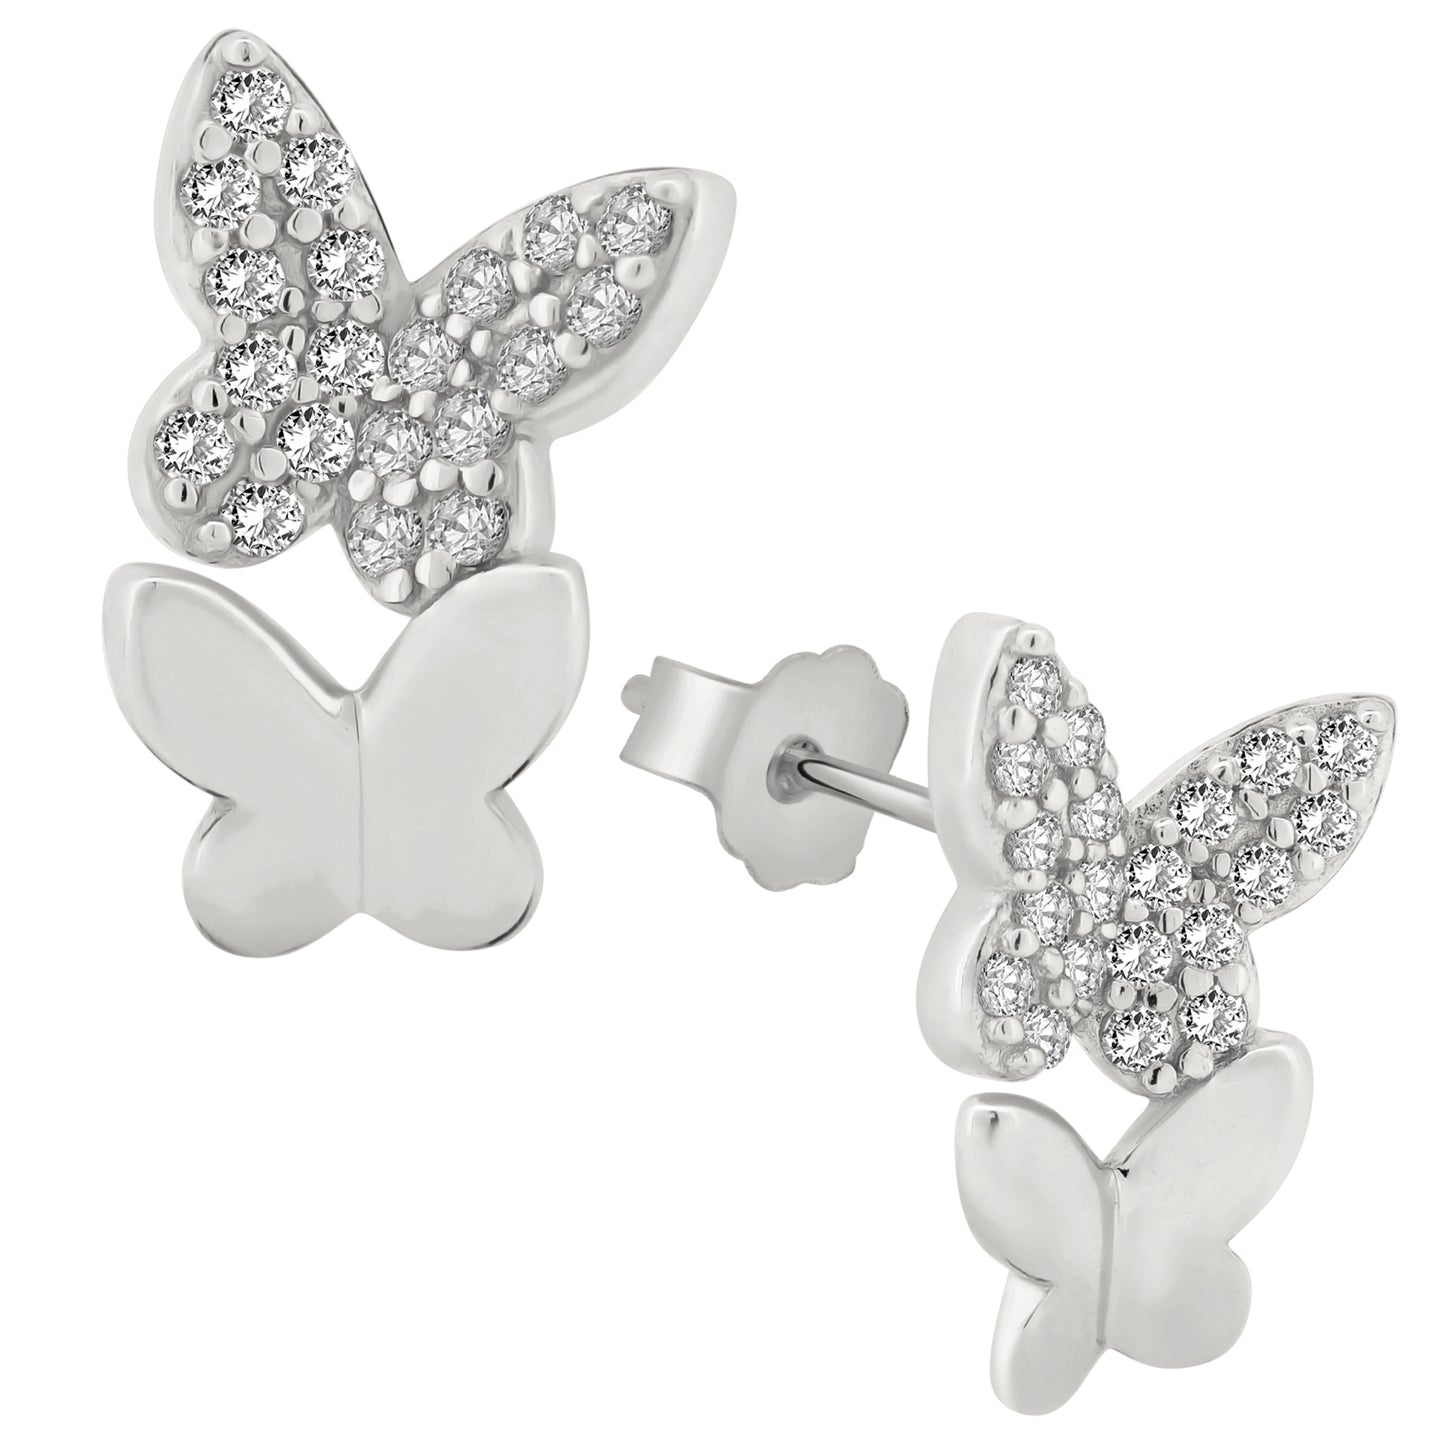 Cubic Zirconia Butterfly Earrings, 925 Sterling Silver, Double Design, Push Backing, Shimmering Accents